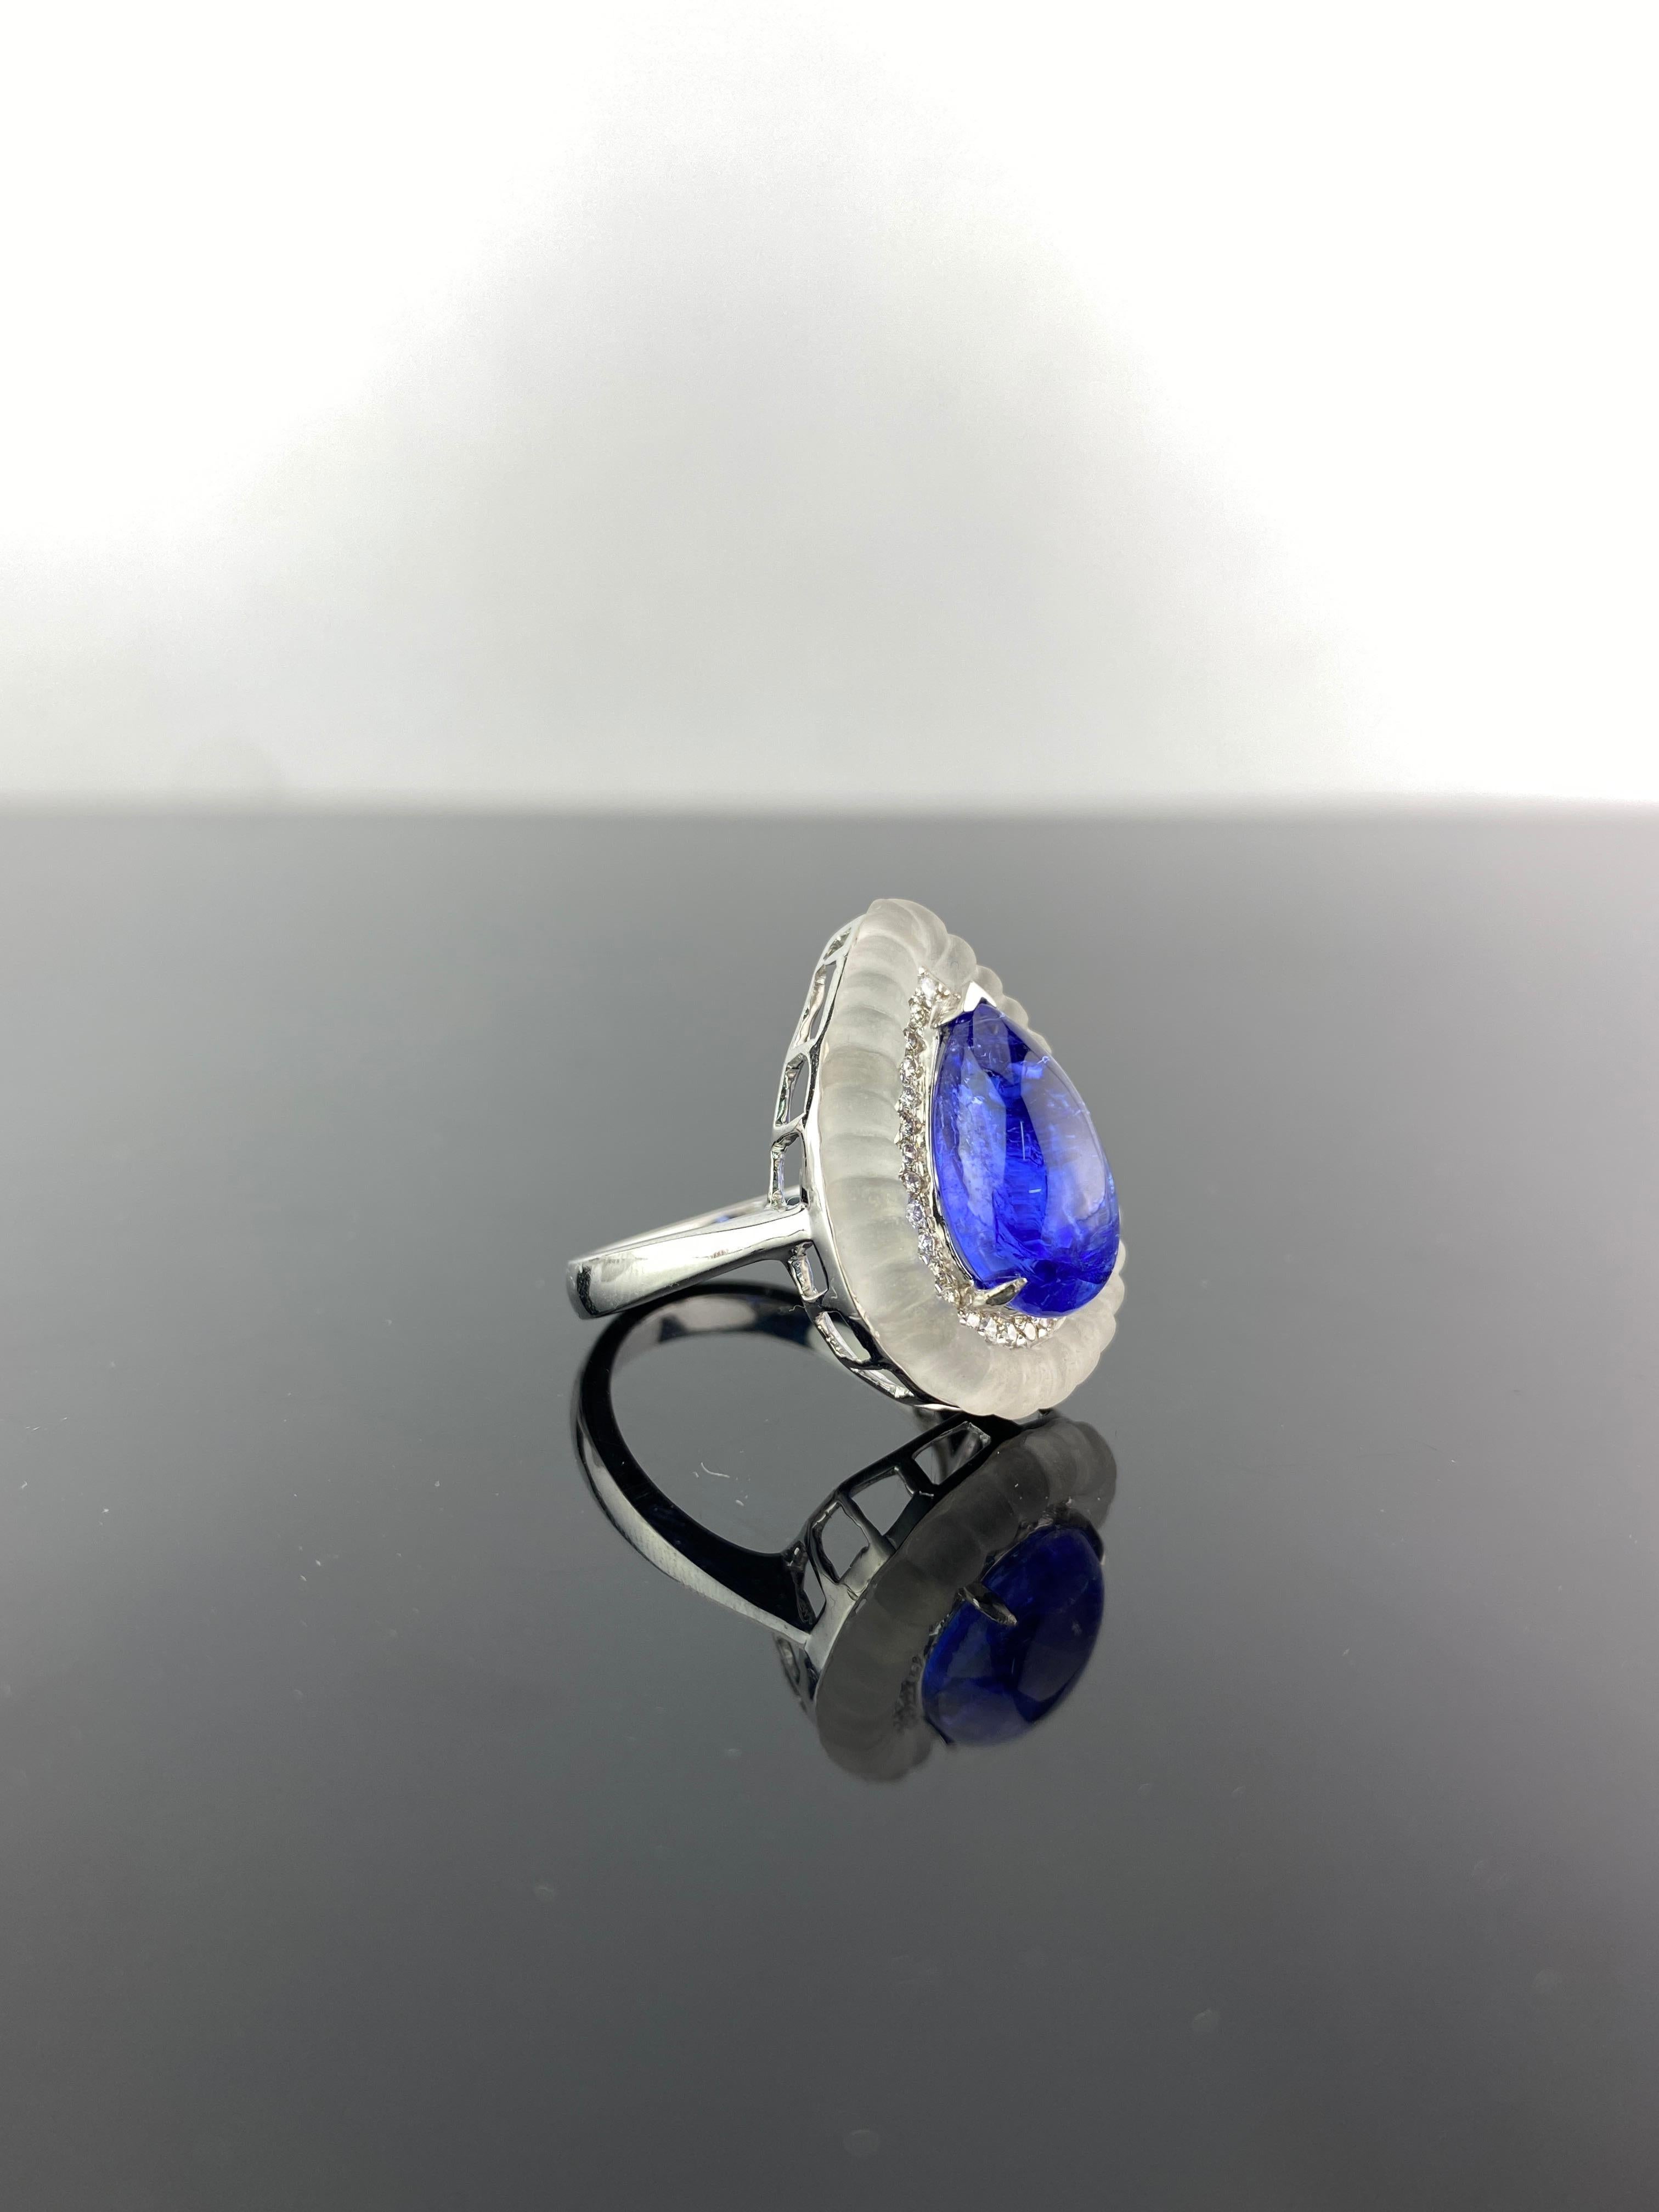 A art-deco looking, 7.35 carat pear shape cabochon Tanzanite, 0.36 carat Diamond and 5.53 carat Rock Crystal cocktail ring. The Tanzanite is transparent, with an ideal blue hue, and is set in 8.21 grams of solid 18K White Gold. Available in  pear